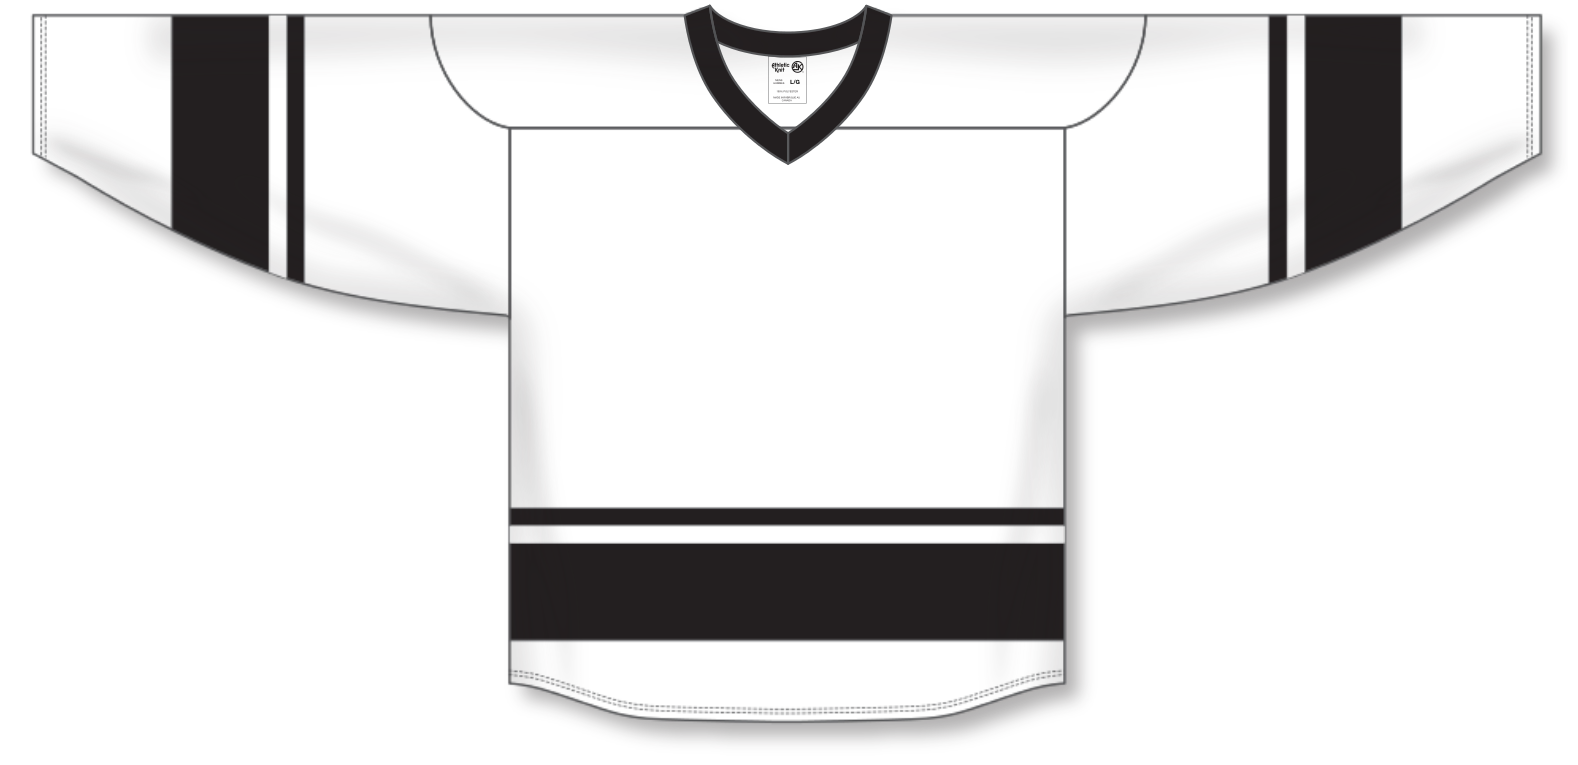 Athletic Knit H6400-213 House League Hockey Jersey - Gold / Black